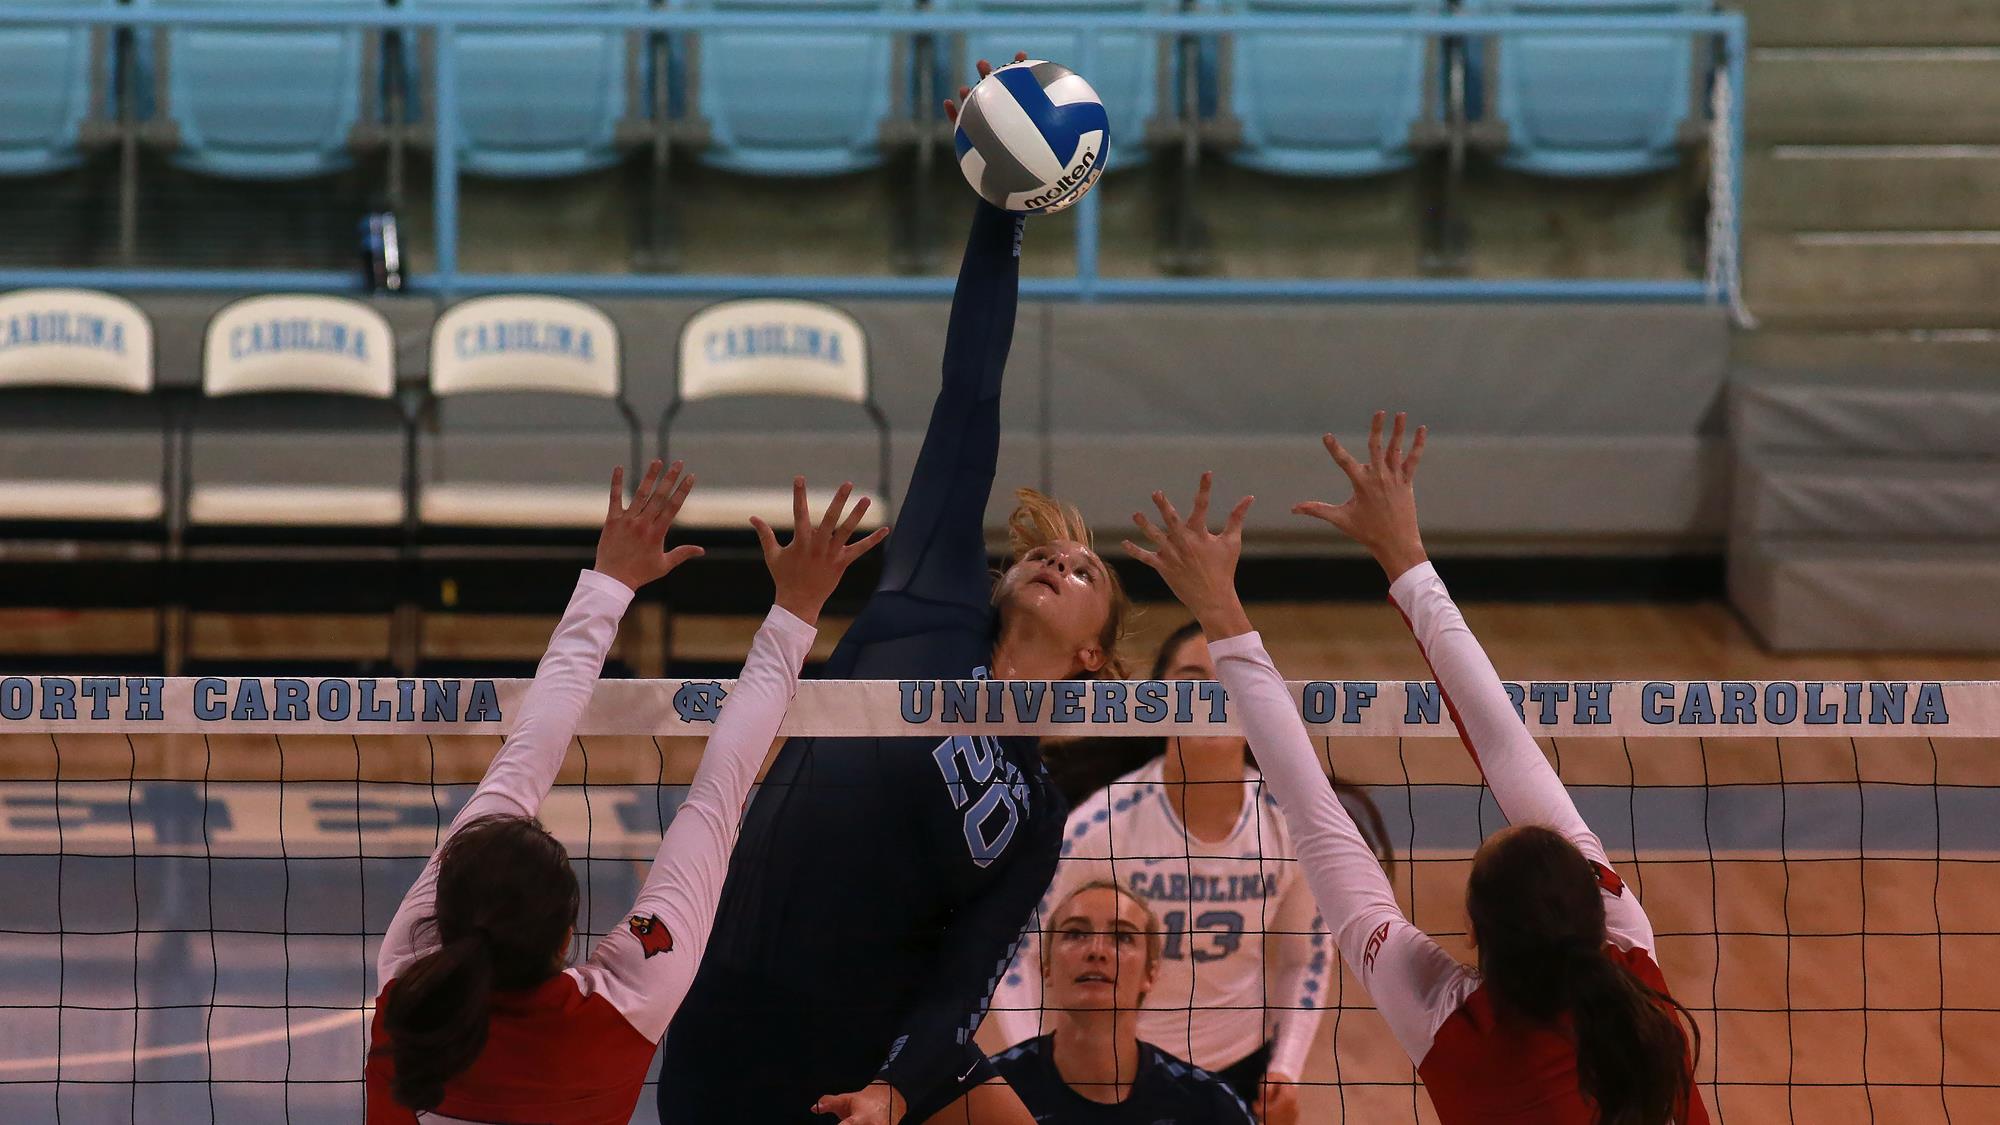 Louisville Ekes Out FiveSet Thriller Over UNC Volleyball in Chapel